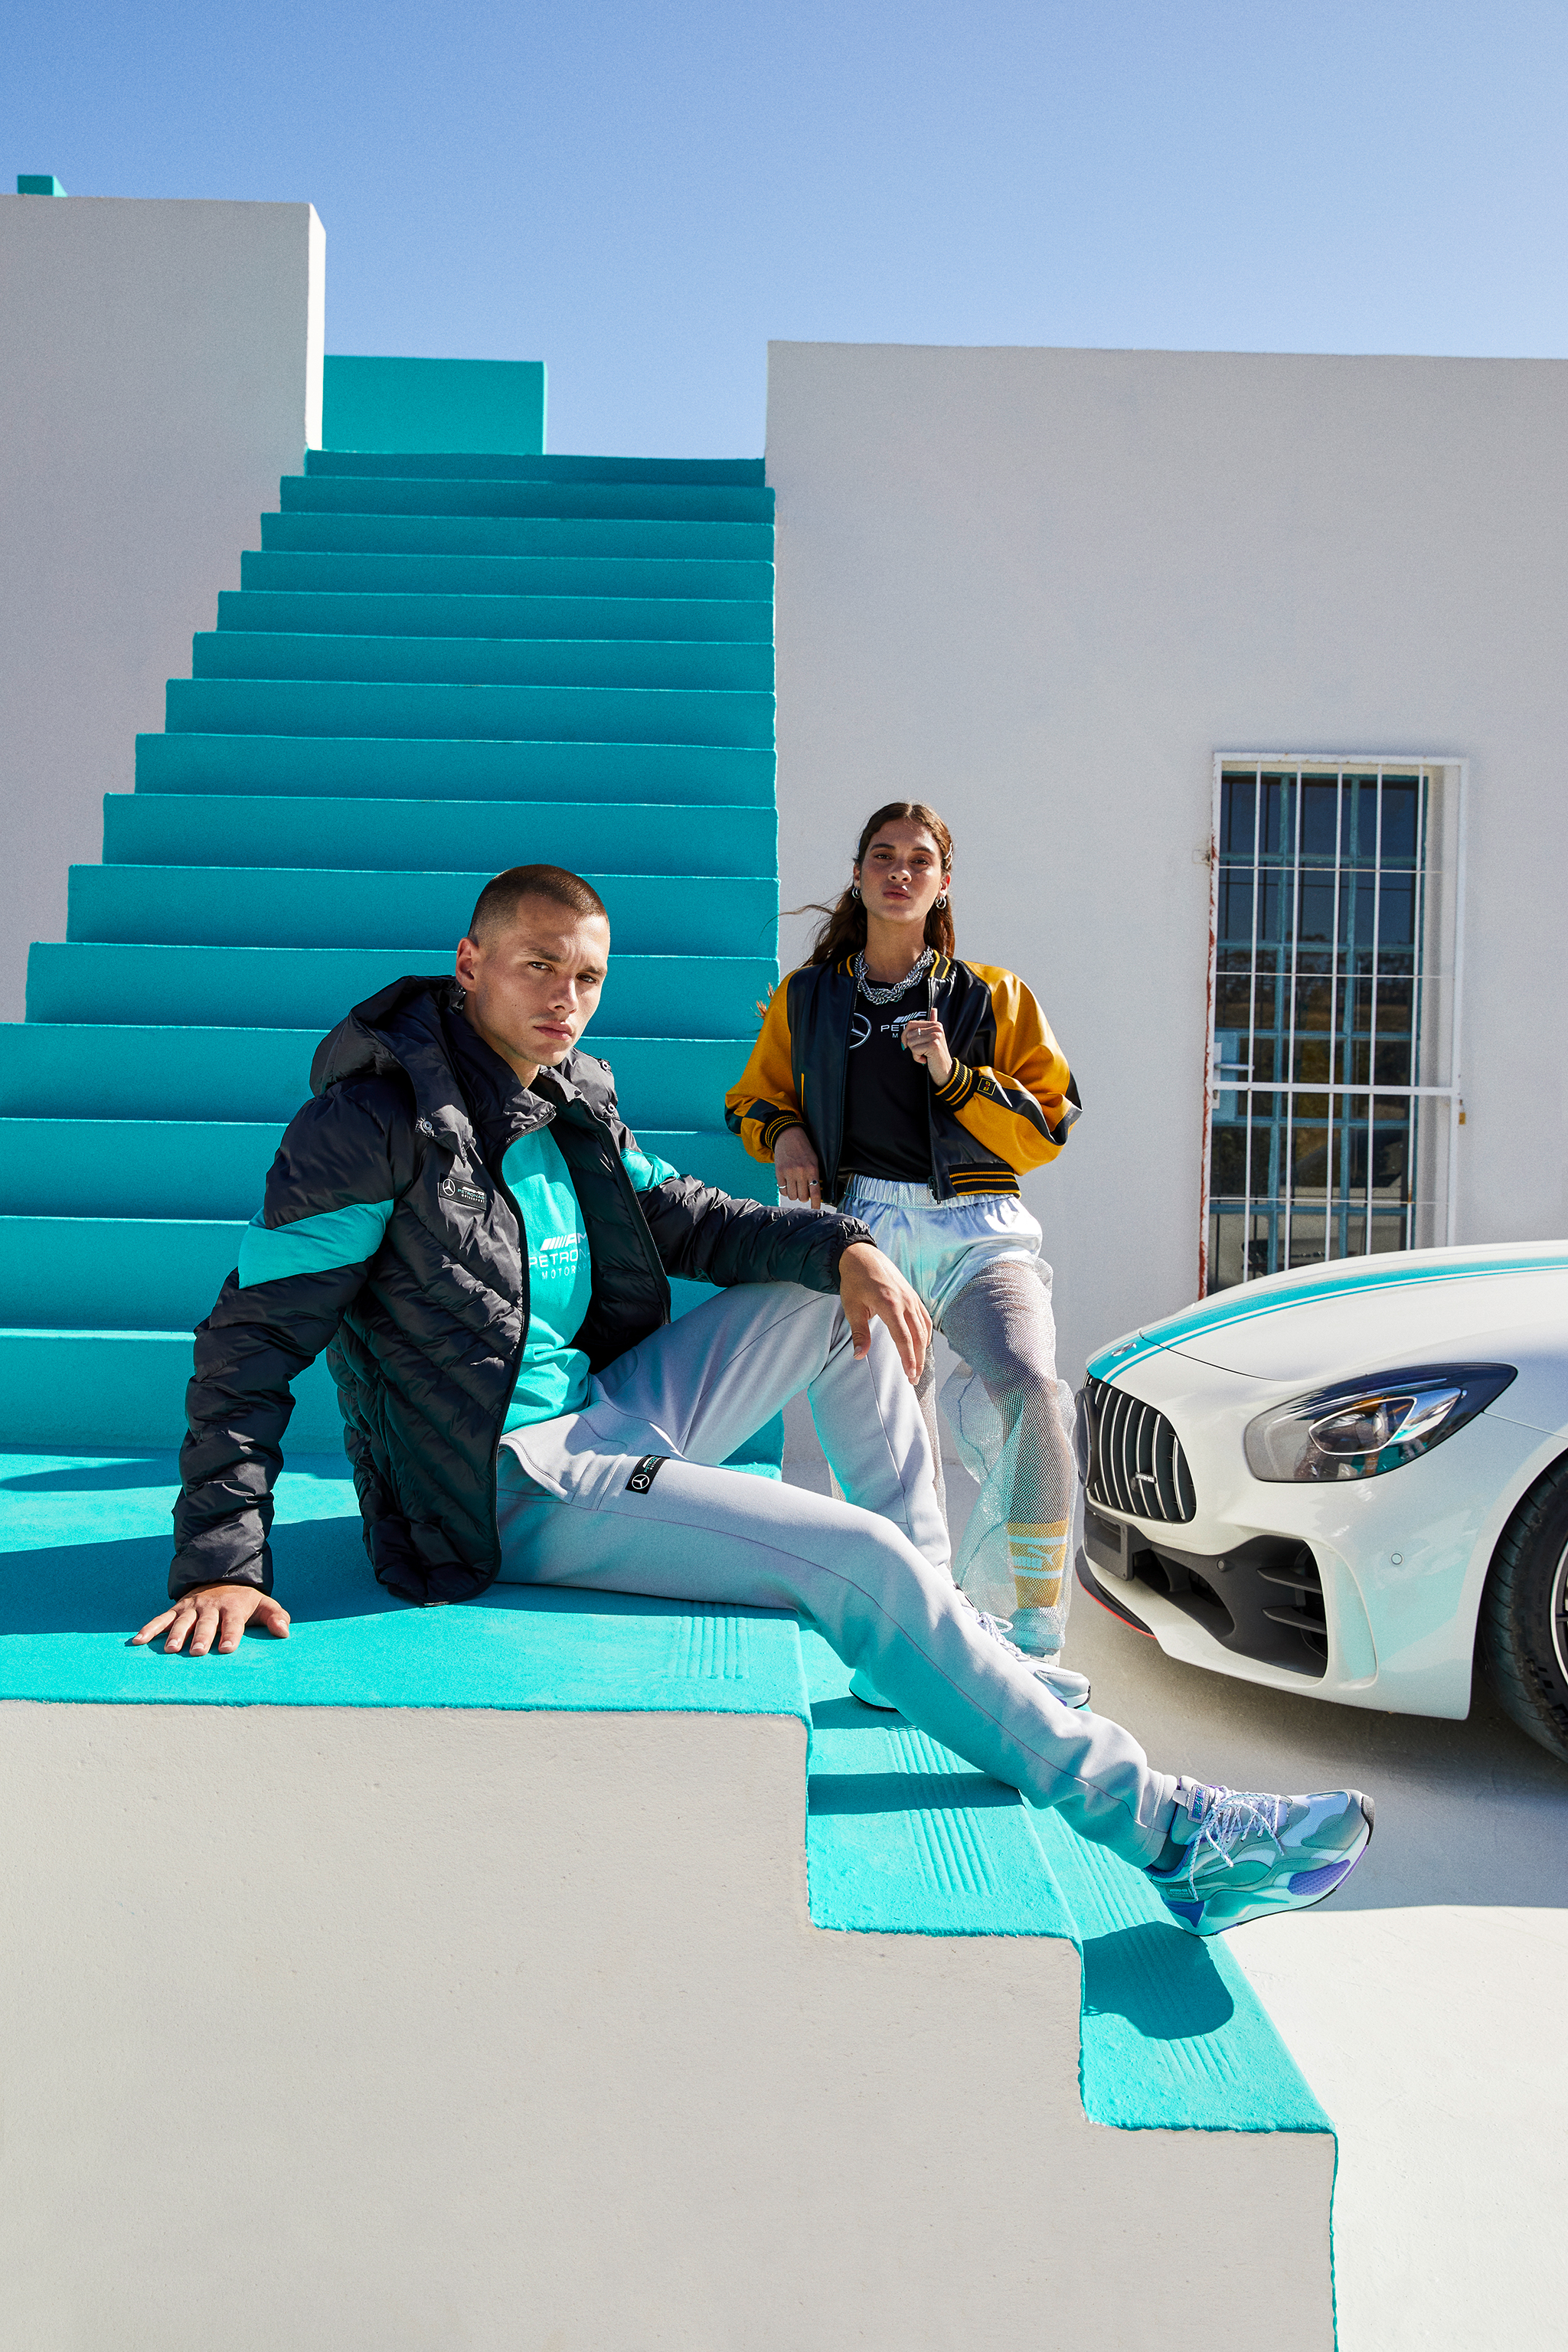 Puma Mods Your Bodykit with Their Latest Apparel Collection with